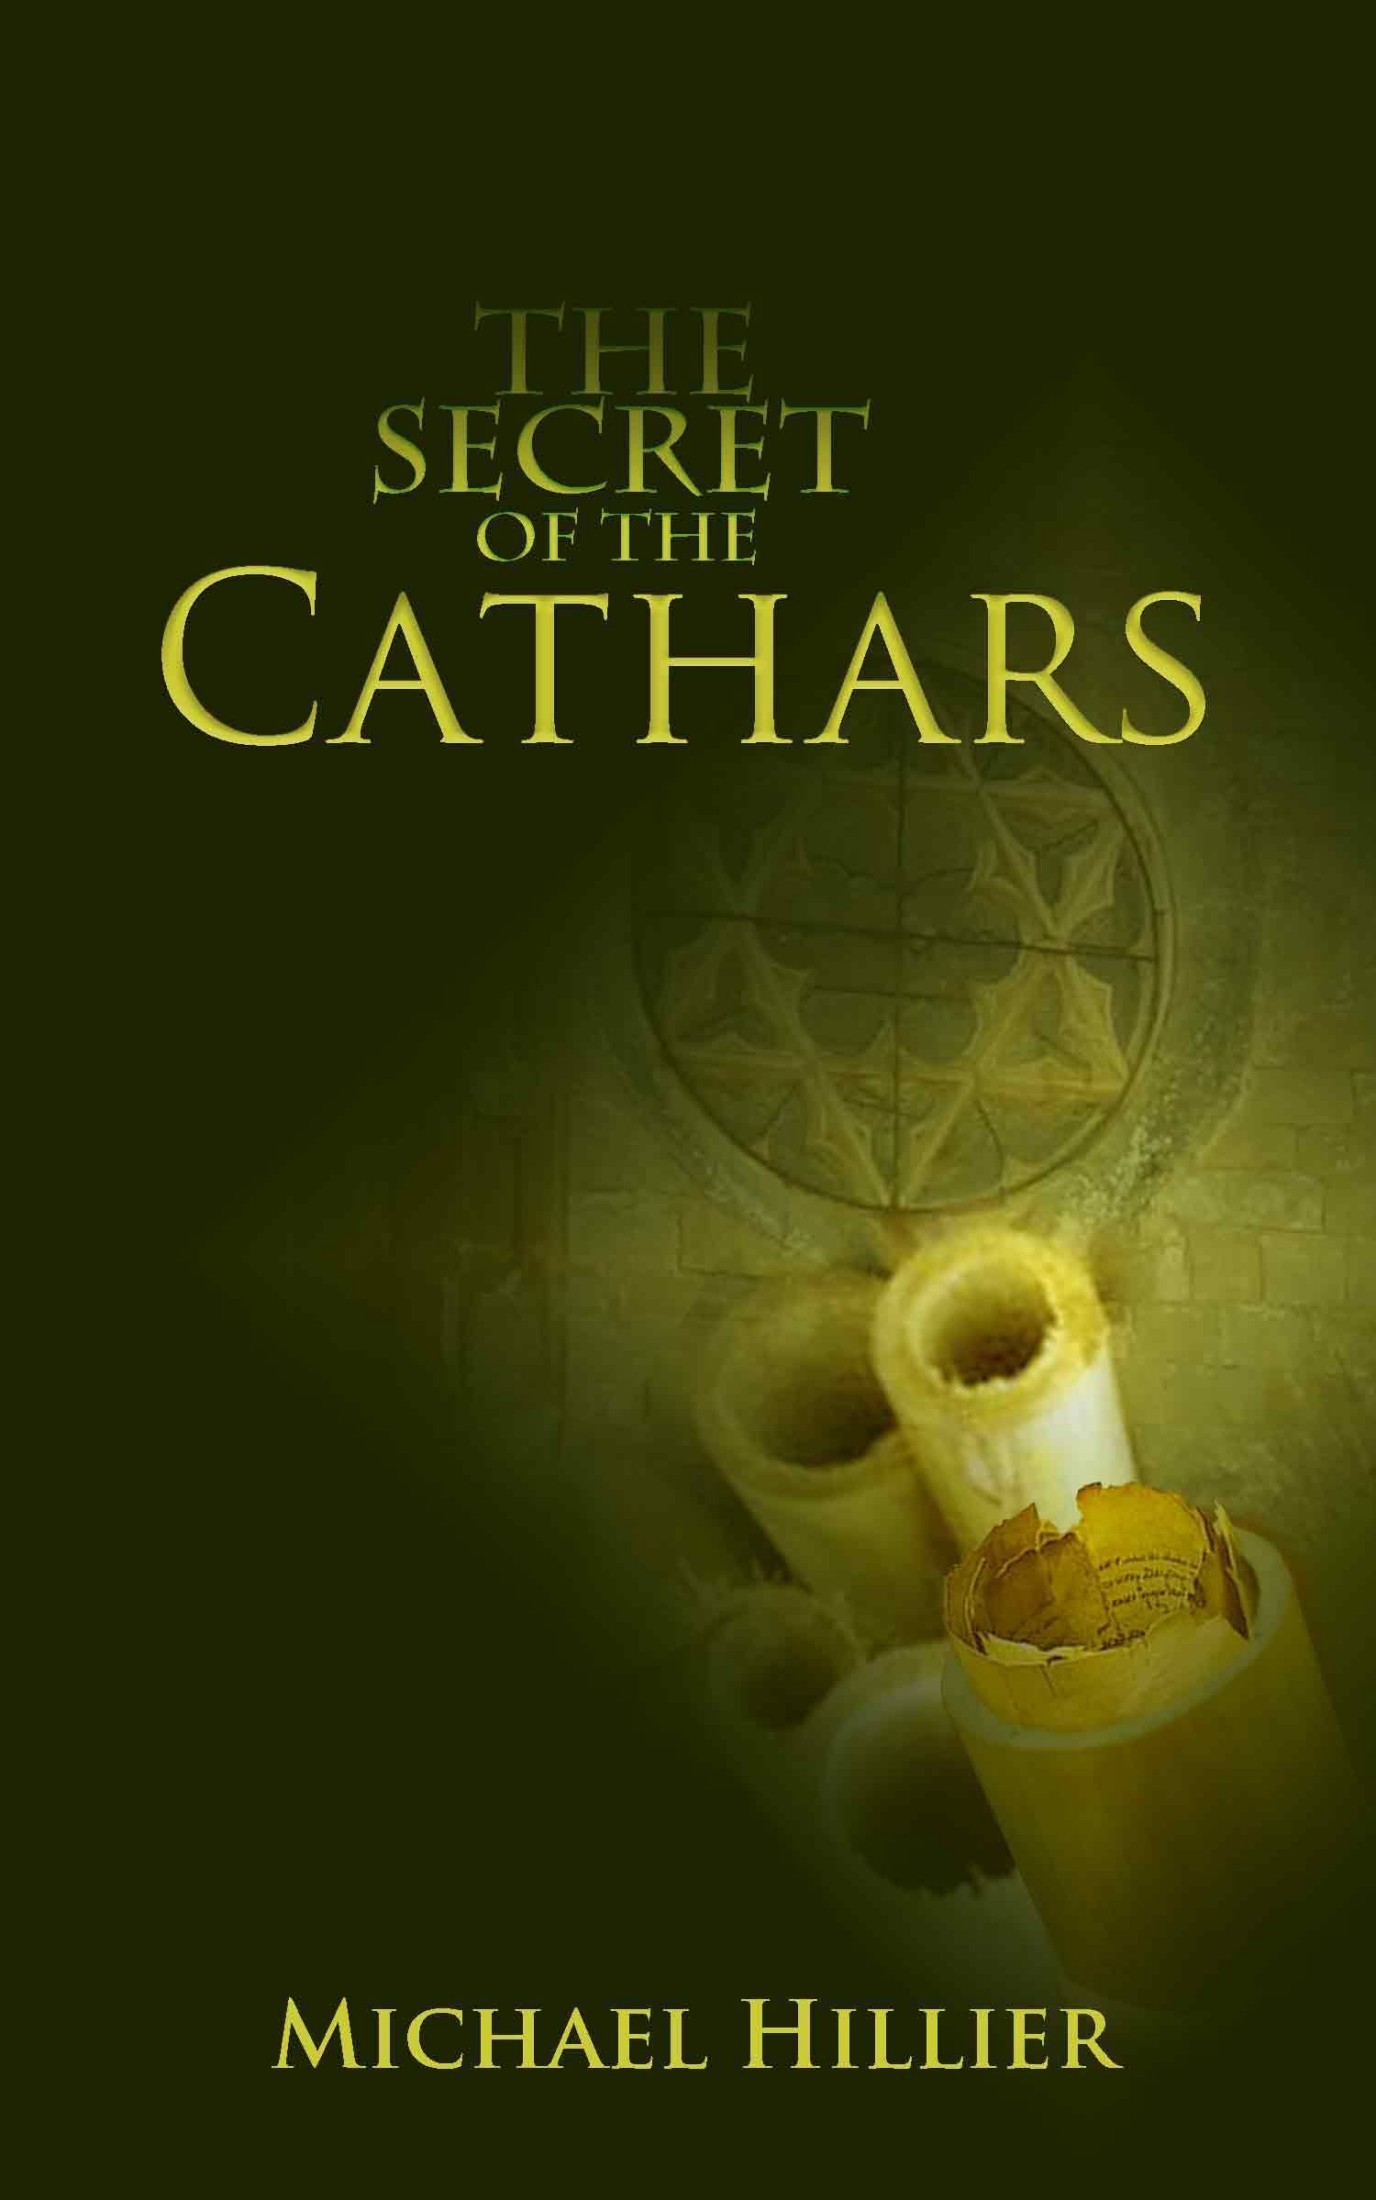 The Secret of the Cathars